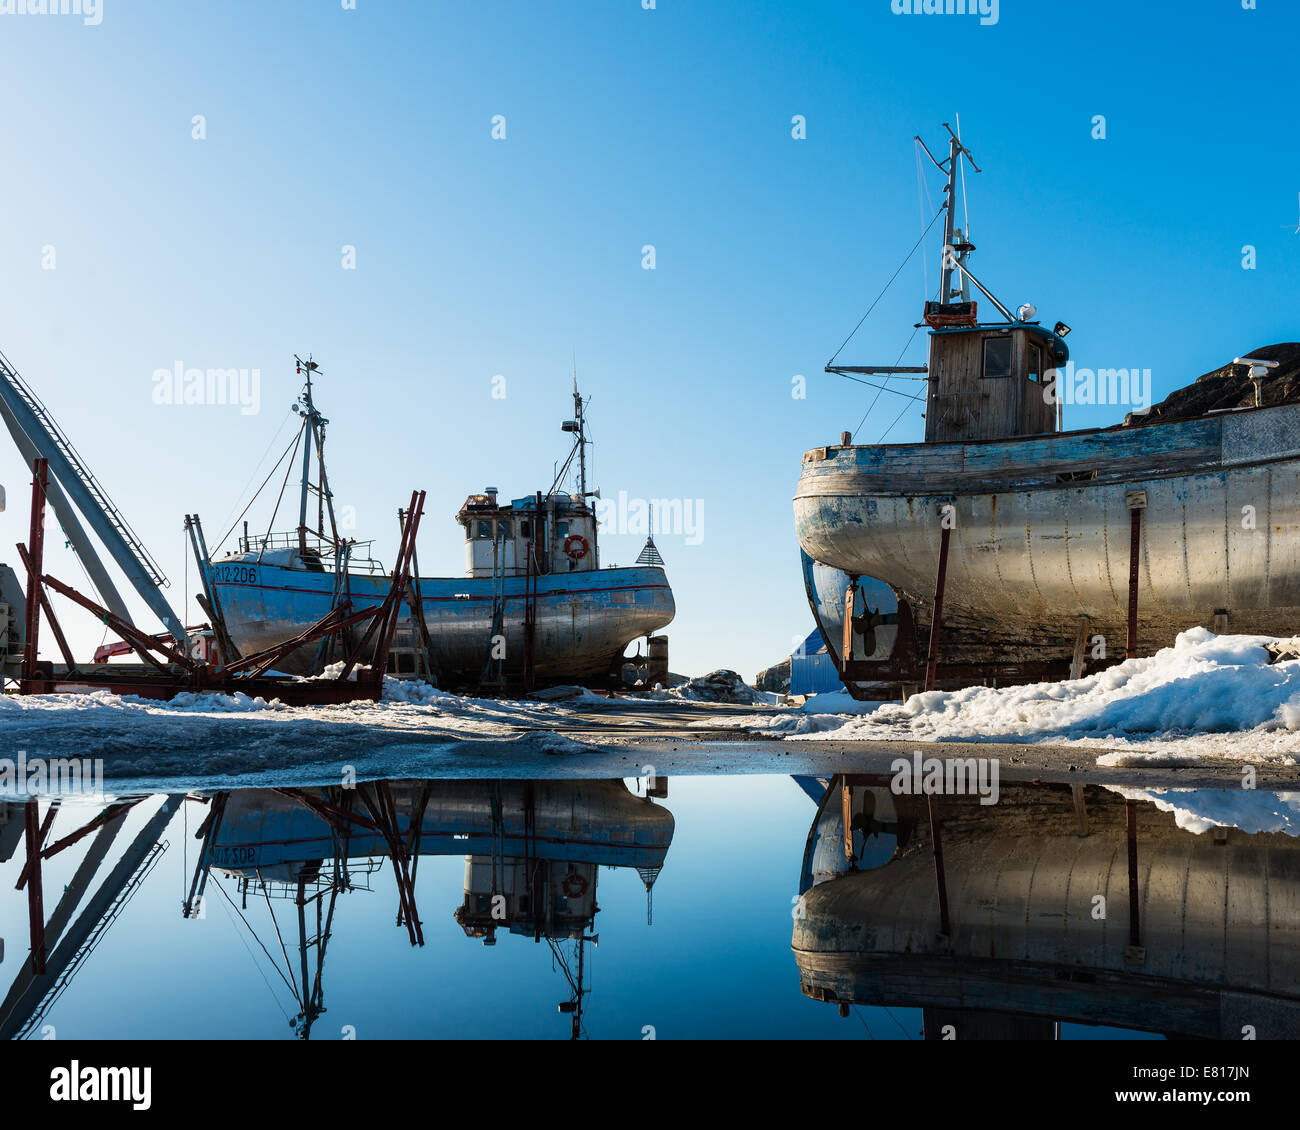 Boats beached on the snowy shore Stock Photo